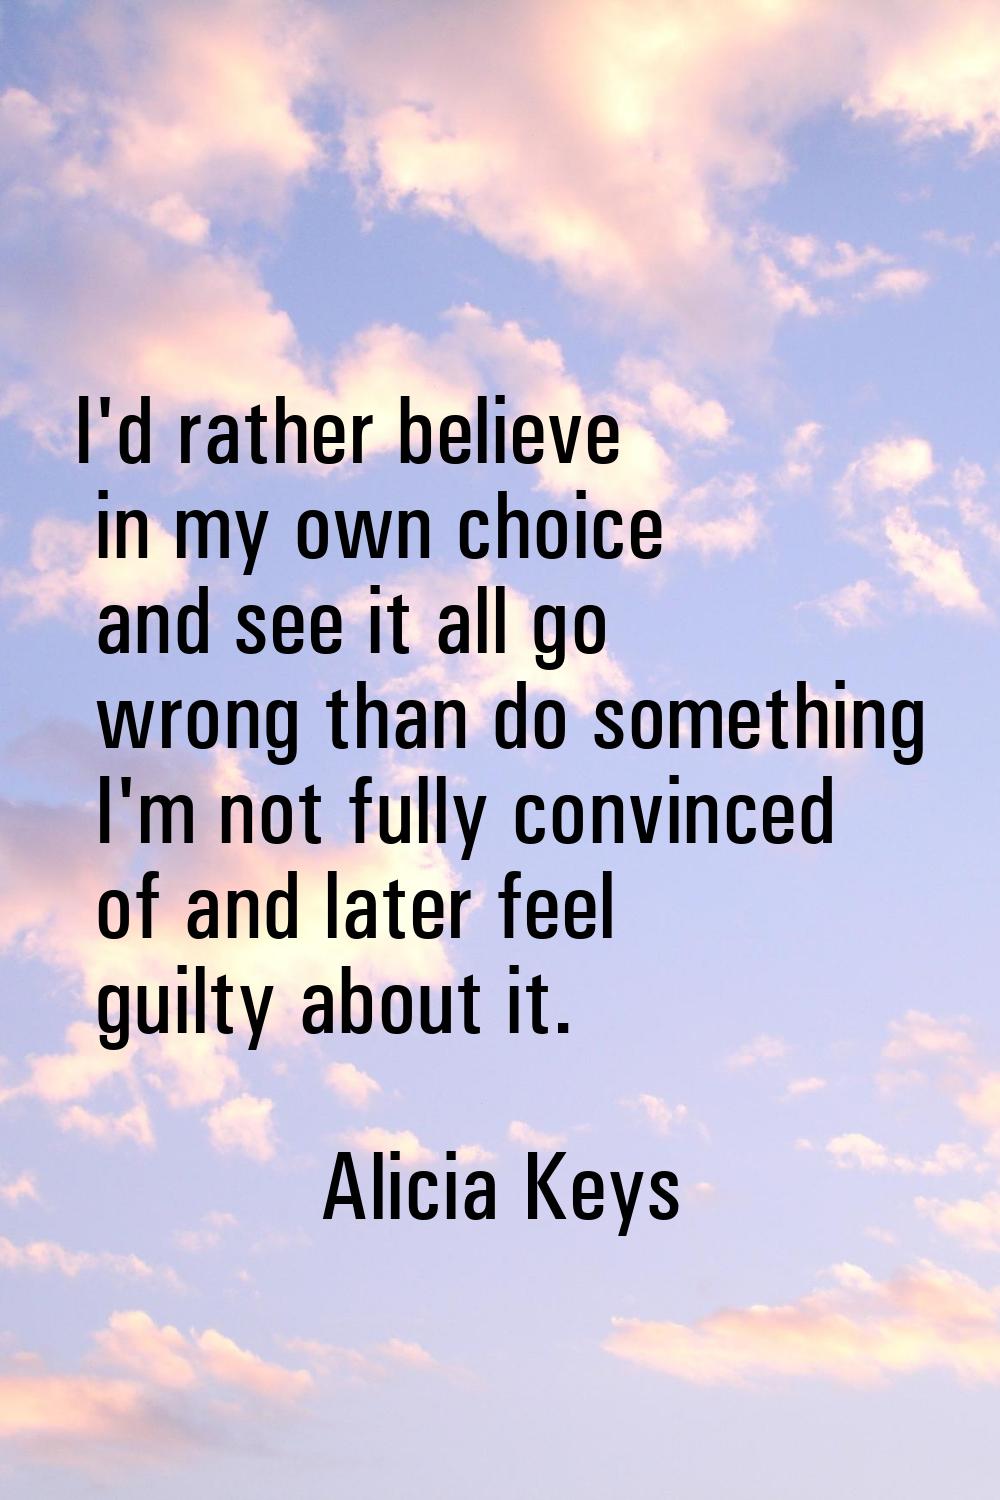 I'd rather believe in my own choice and see it all go wrong than do something I'm not fully convinc